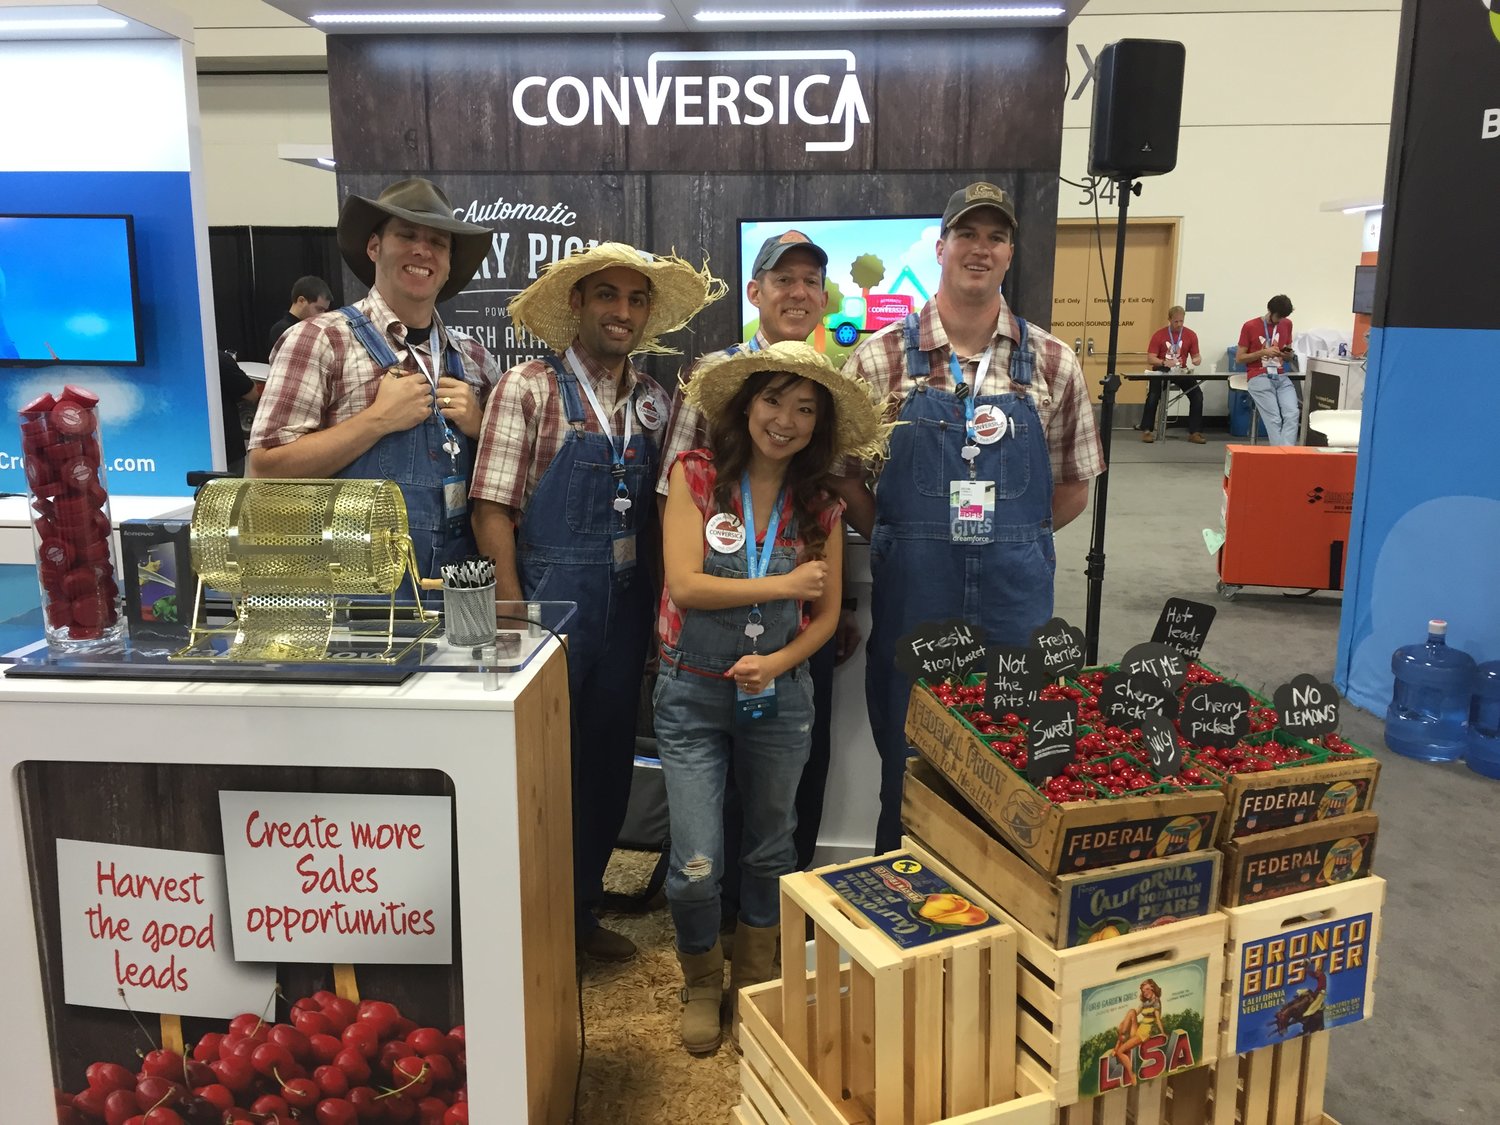 The Conversica team as "lead cherry pickers" at DreamForce.